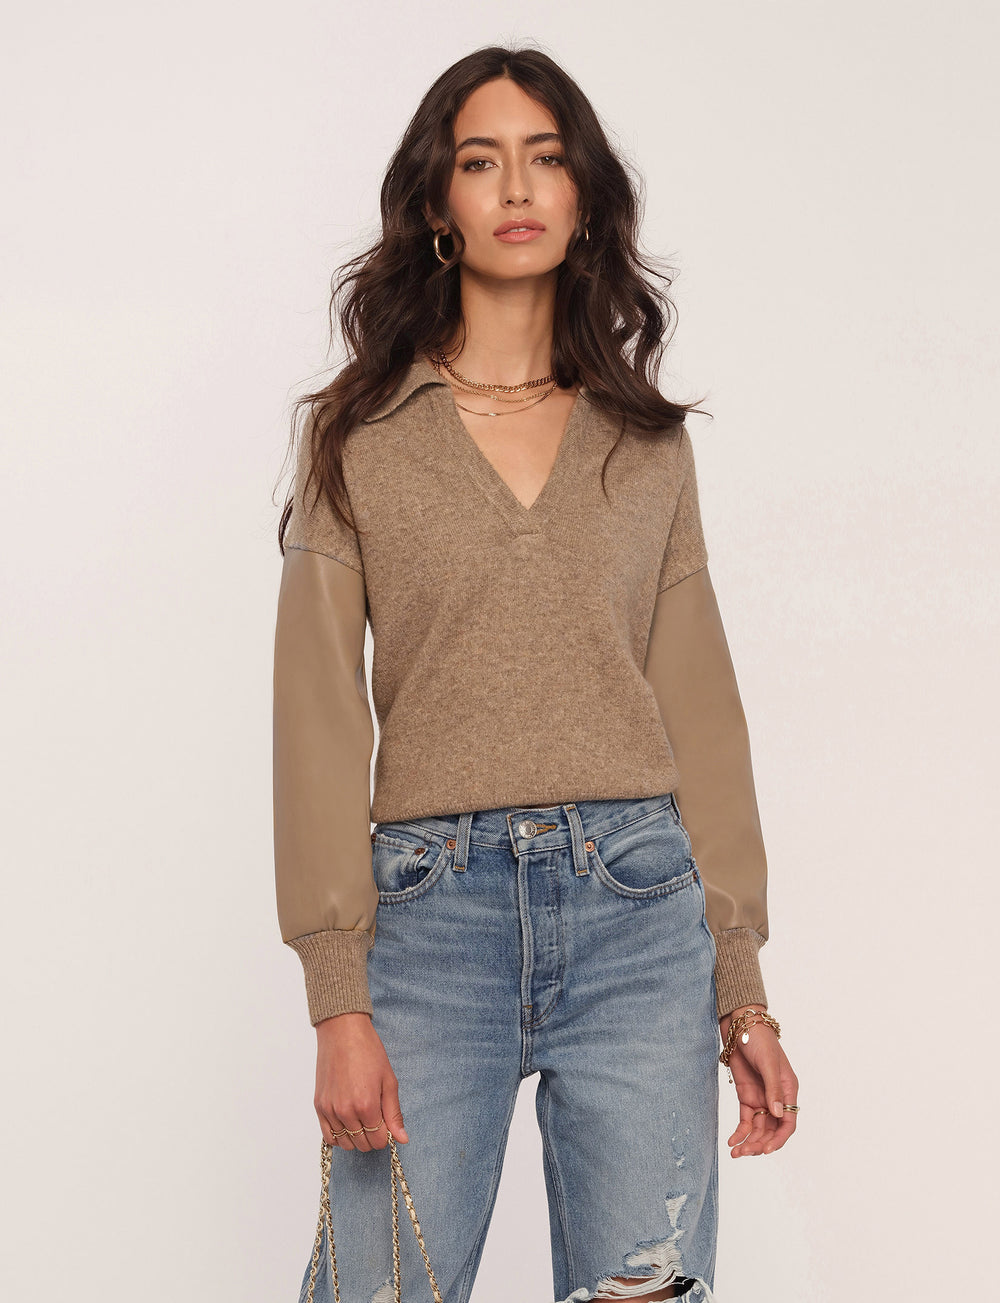 Mia sweater with vegan leather sleeves in beige by Heartloom at Tru Blue Boutique